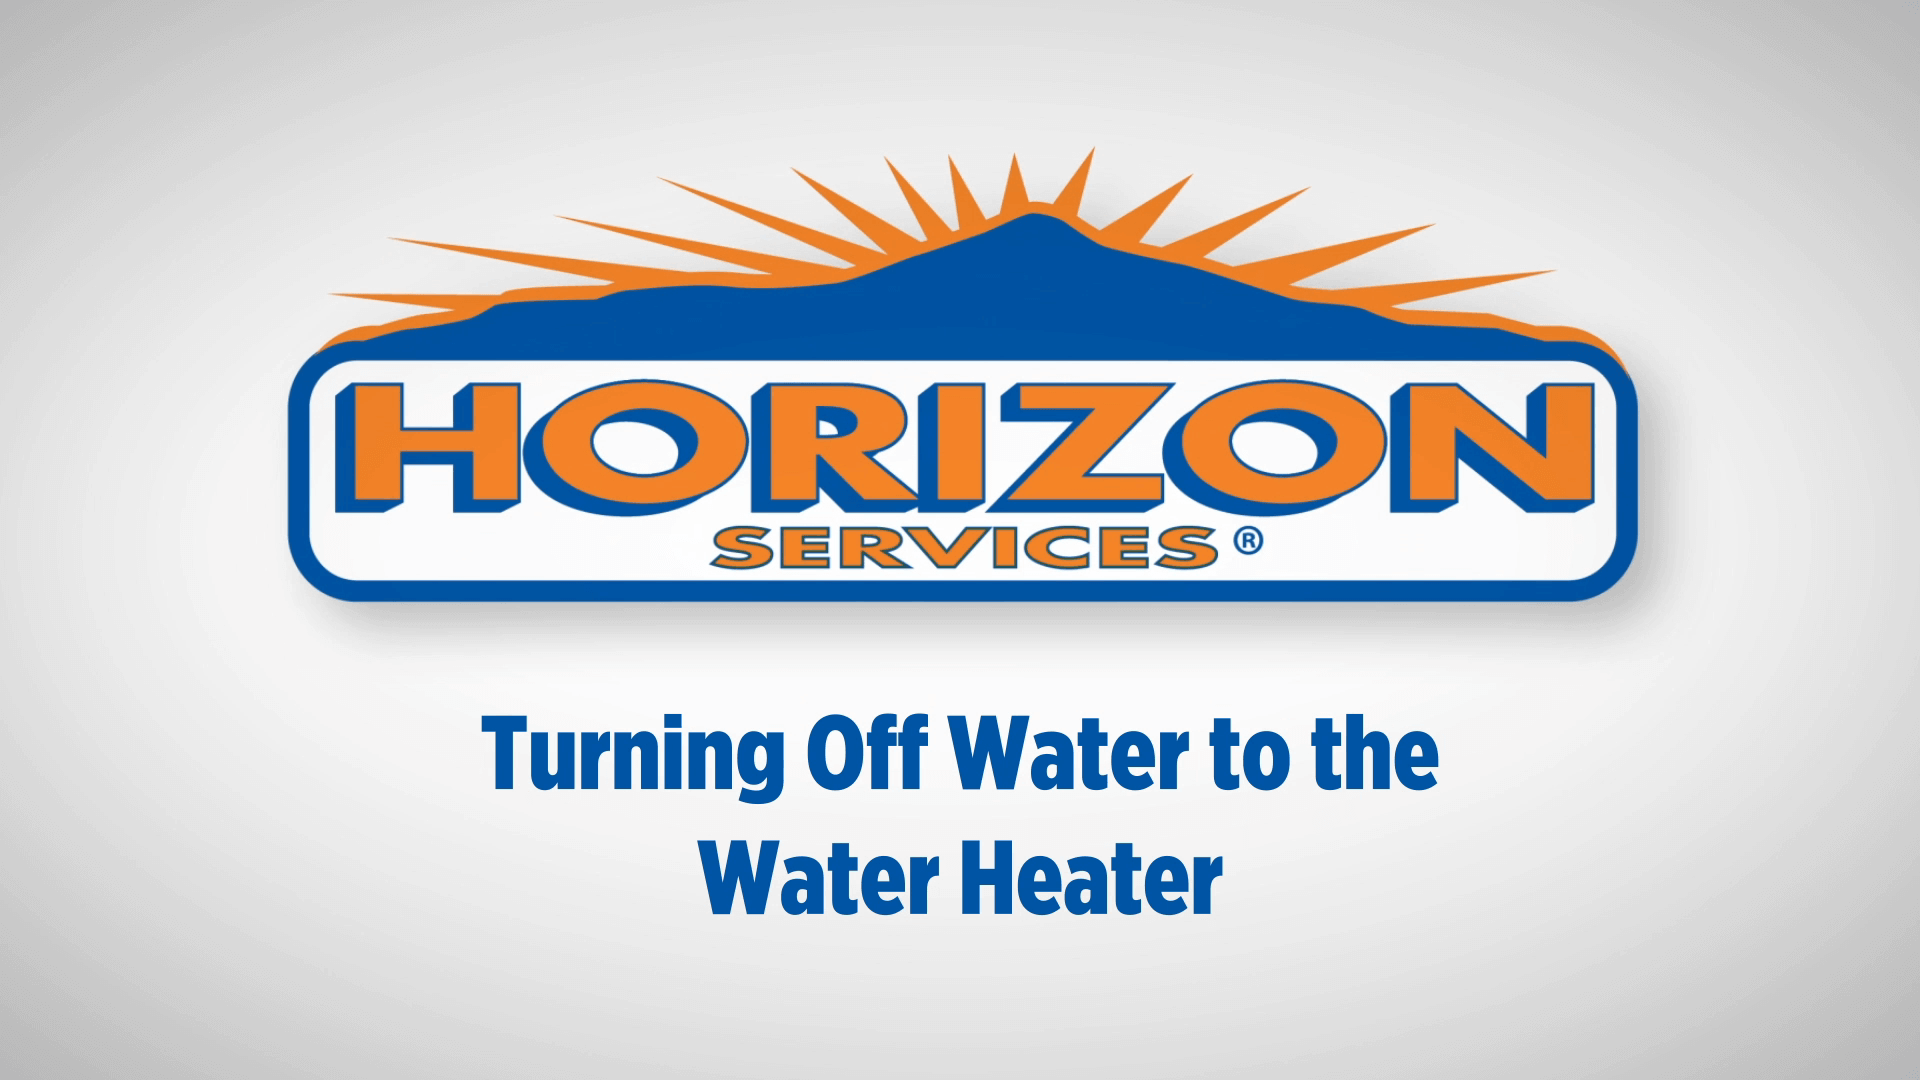 Horizon Services logo with turning off water to the water heater text